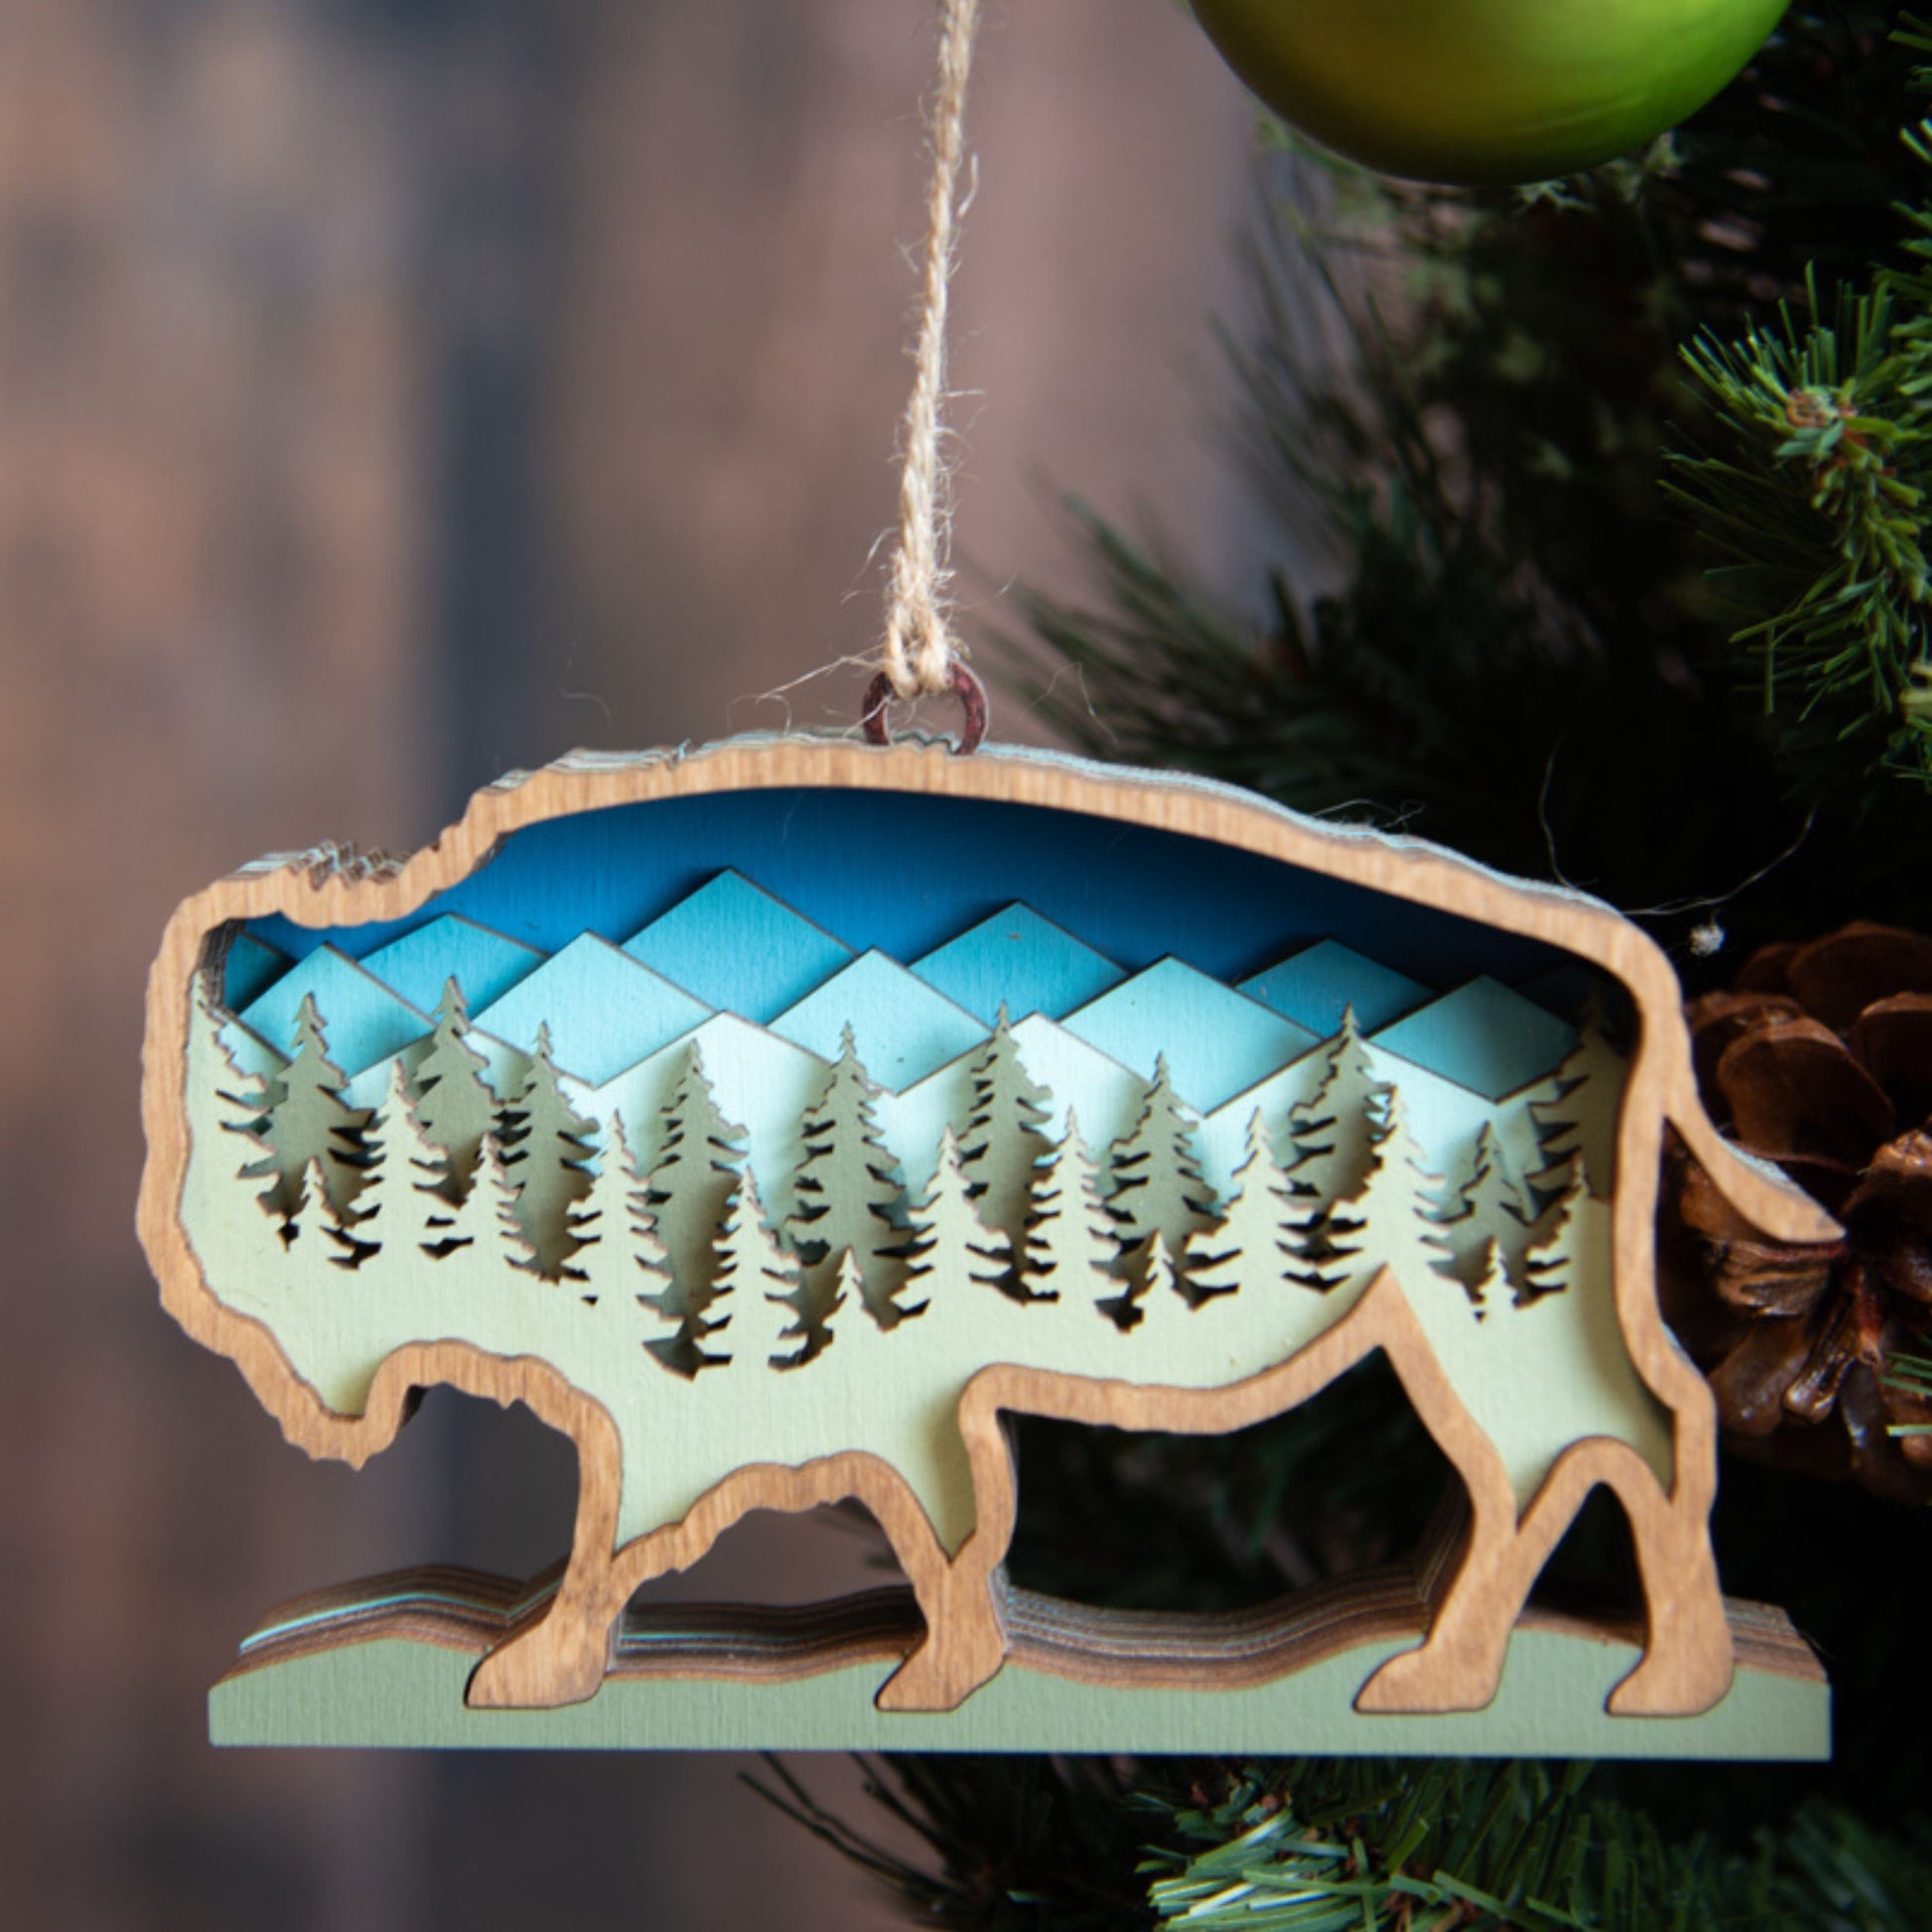 Three-Dimensional Wooden Ornament - Grizzly bear conservation and